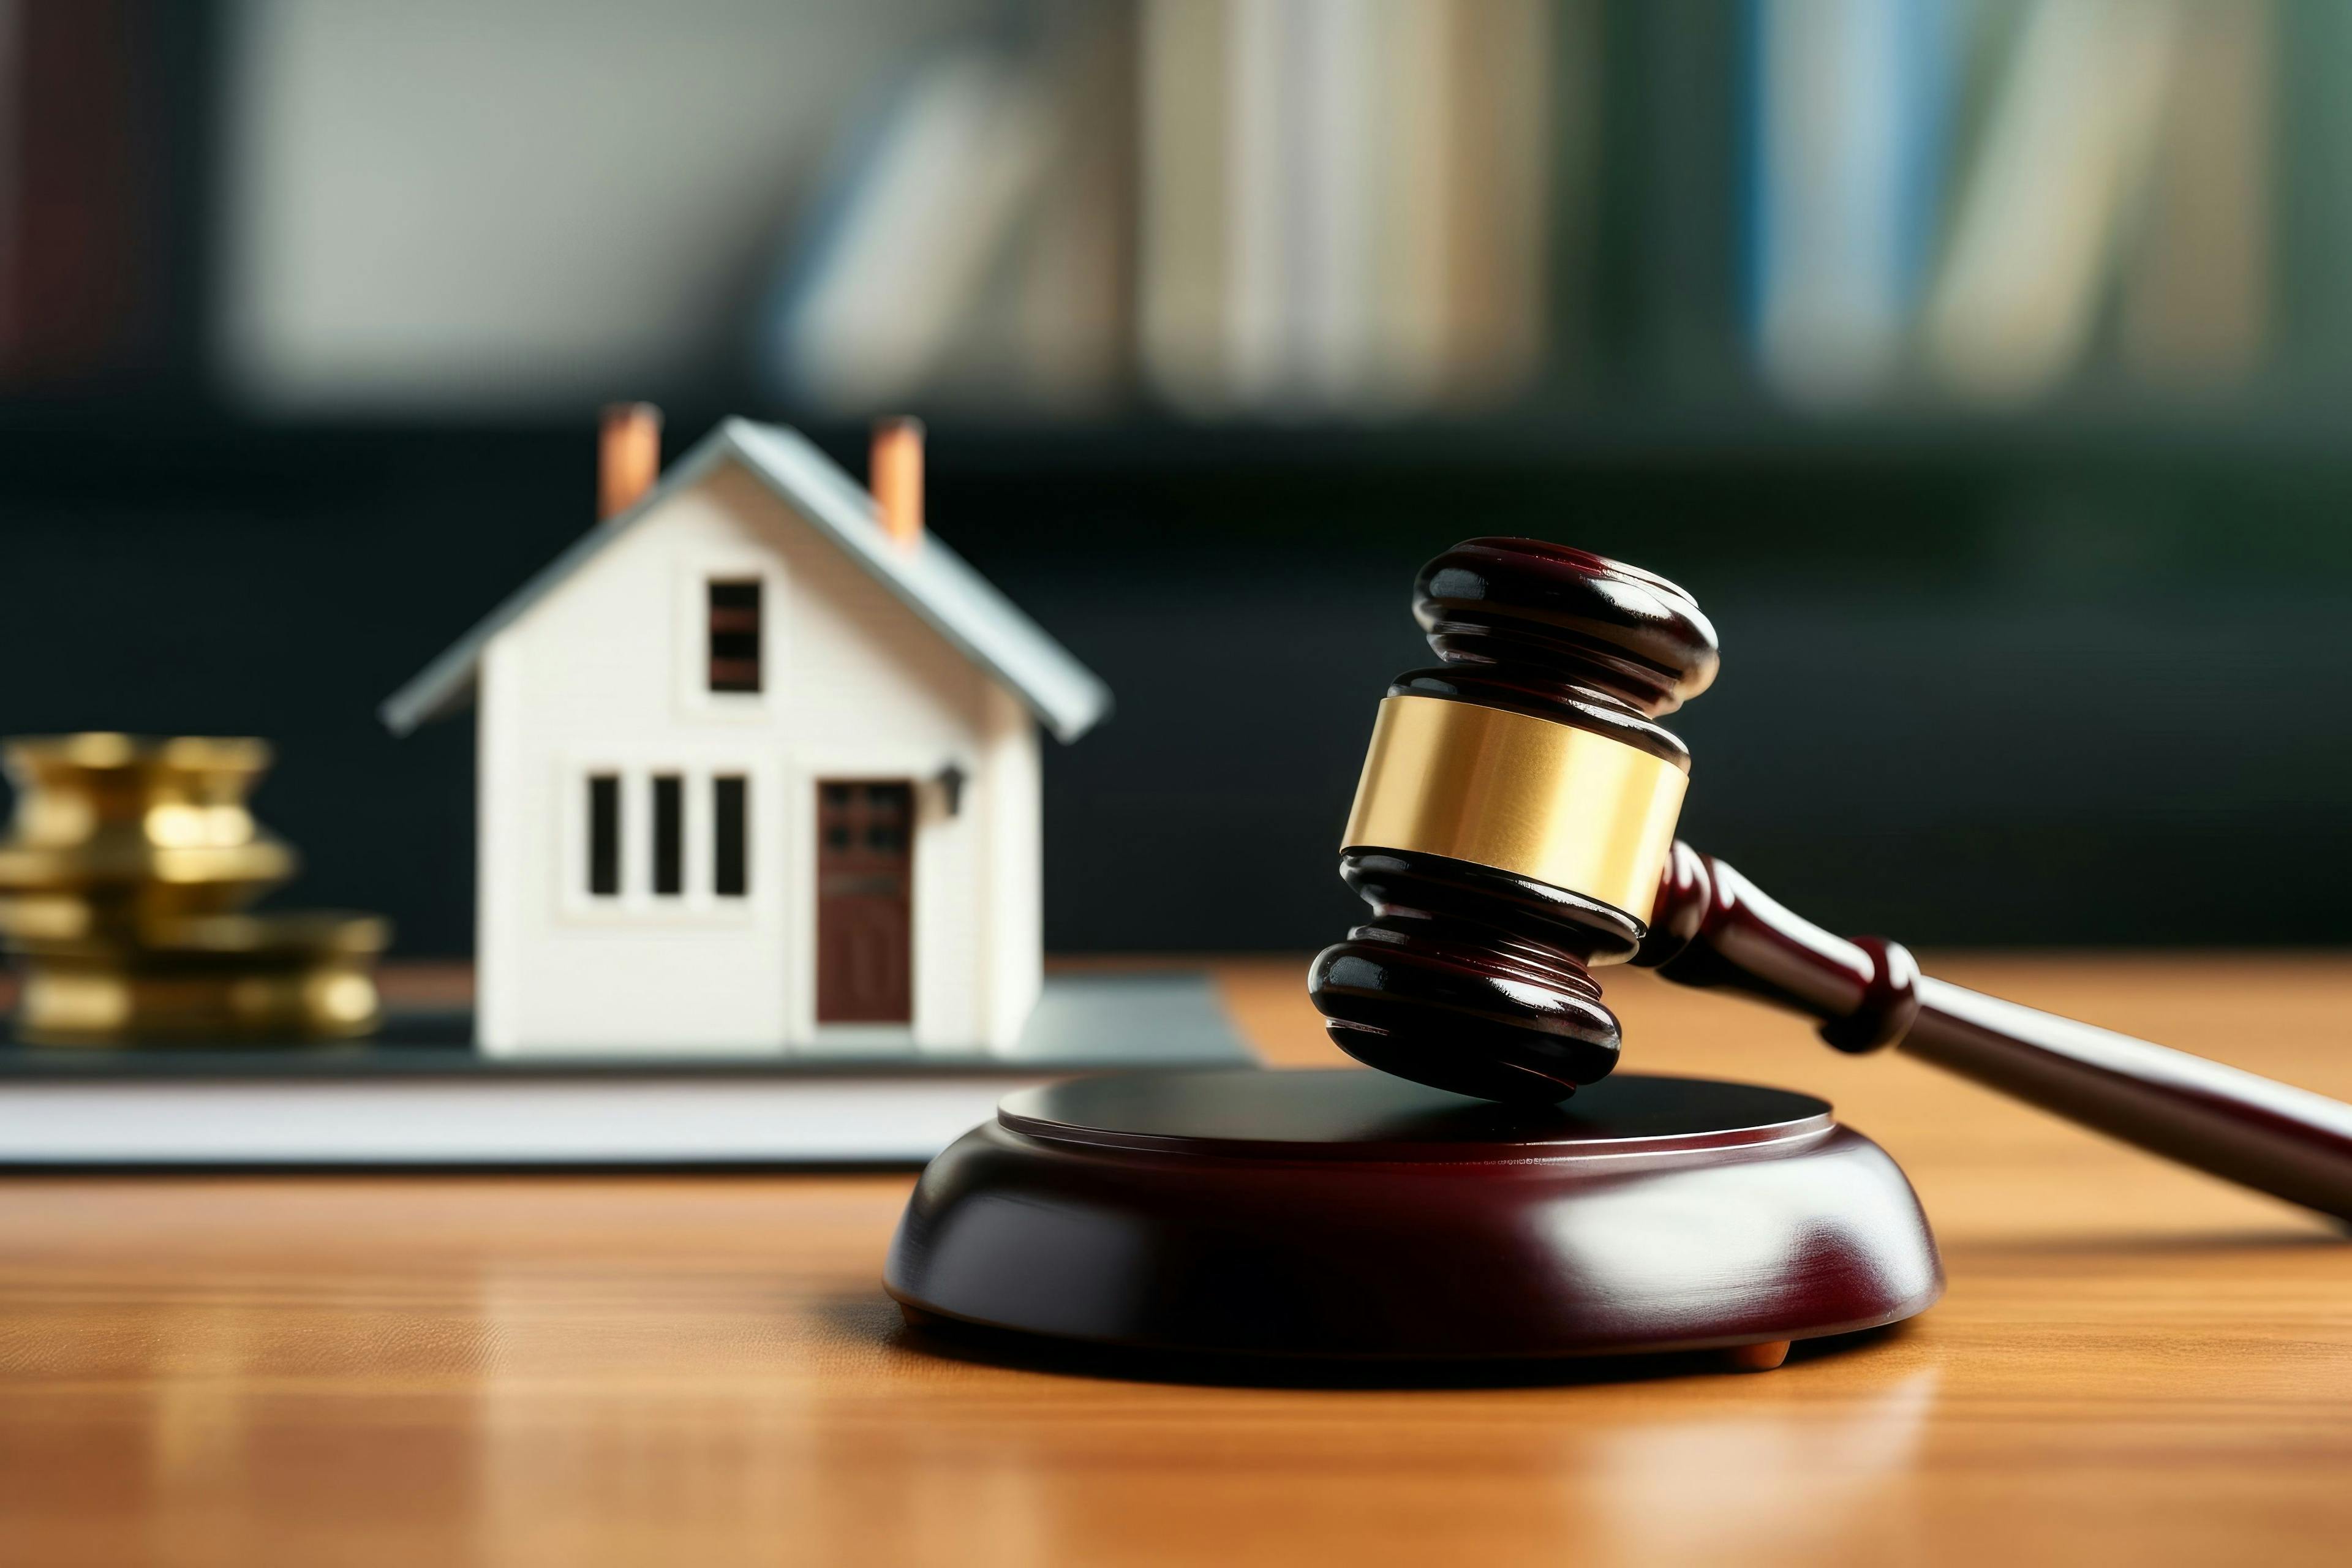 Courtroom gavel with home in the background | Image Credit: © Visual Venture - stock.adobe.com